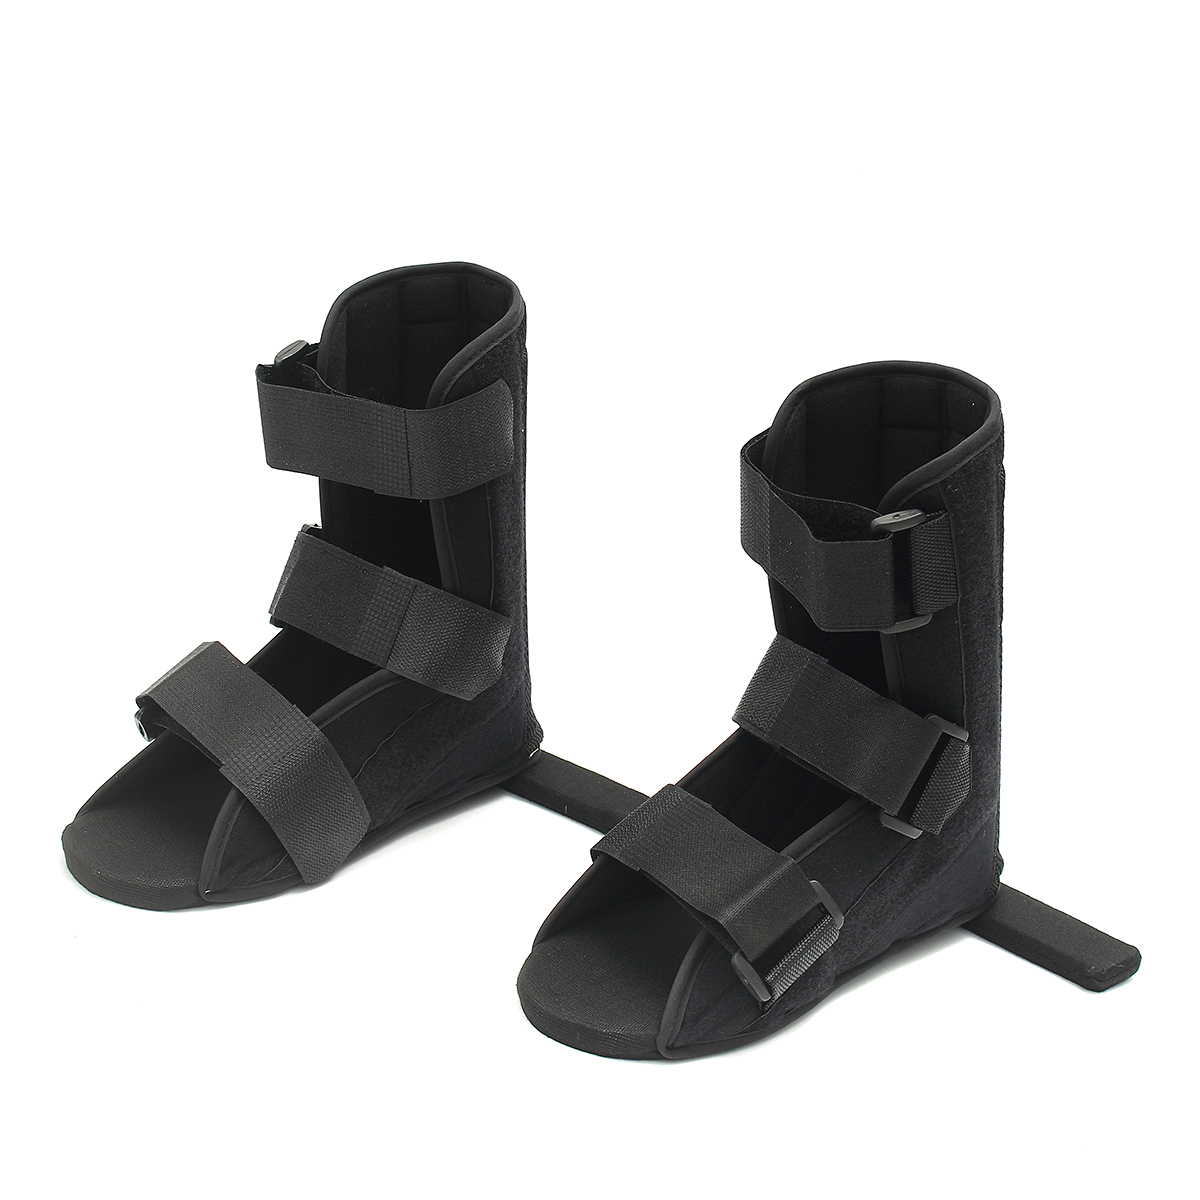 

Adjustable Soft Foot Fracture Recovery Night Splint Plantar Brace Ankle Support Rehabilitation Strap